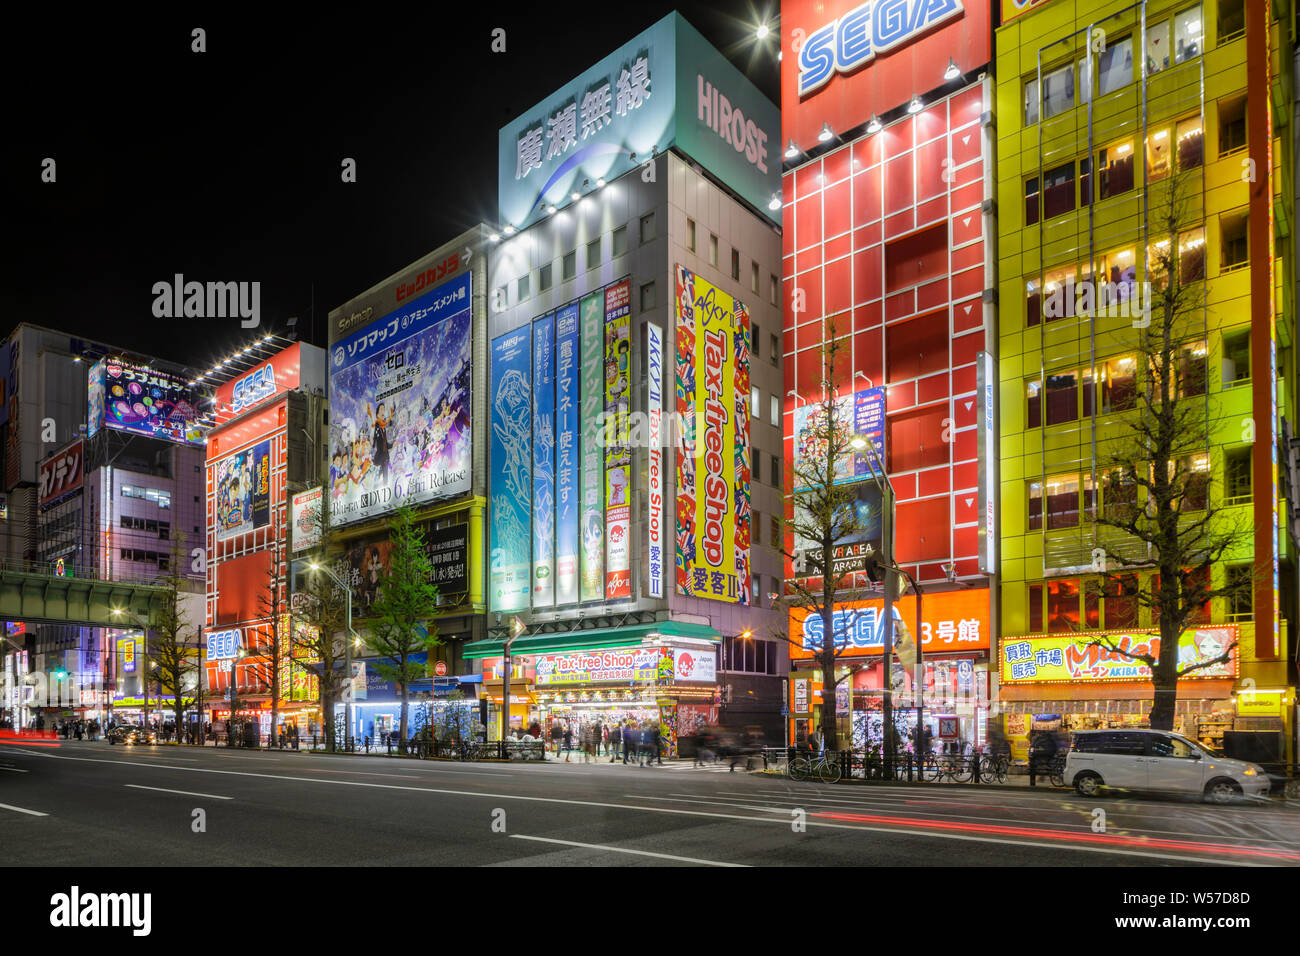 Le futuriste neon night lights Akihabara Electric Town Shopping district, Tokyo, Japon. Banque D'Images